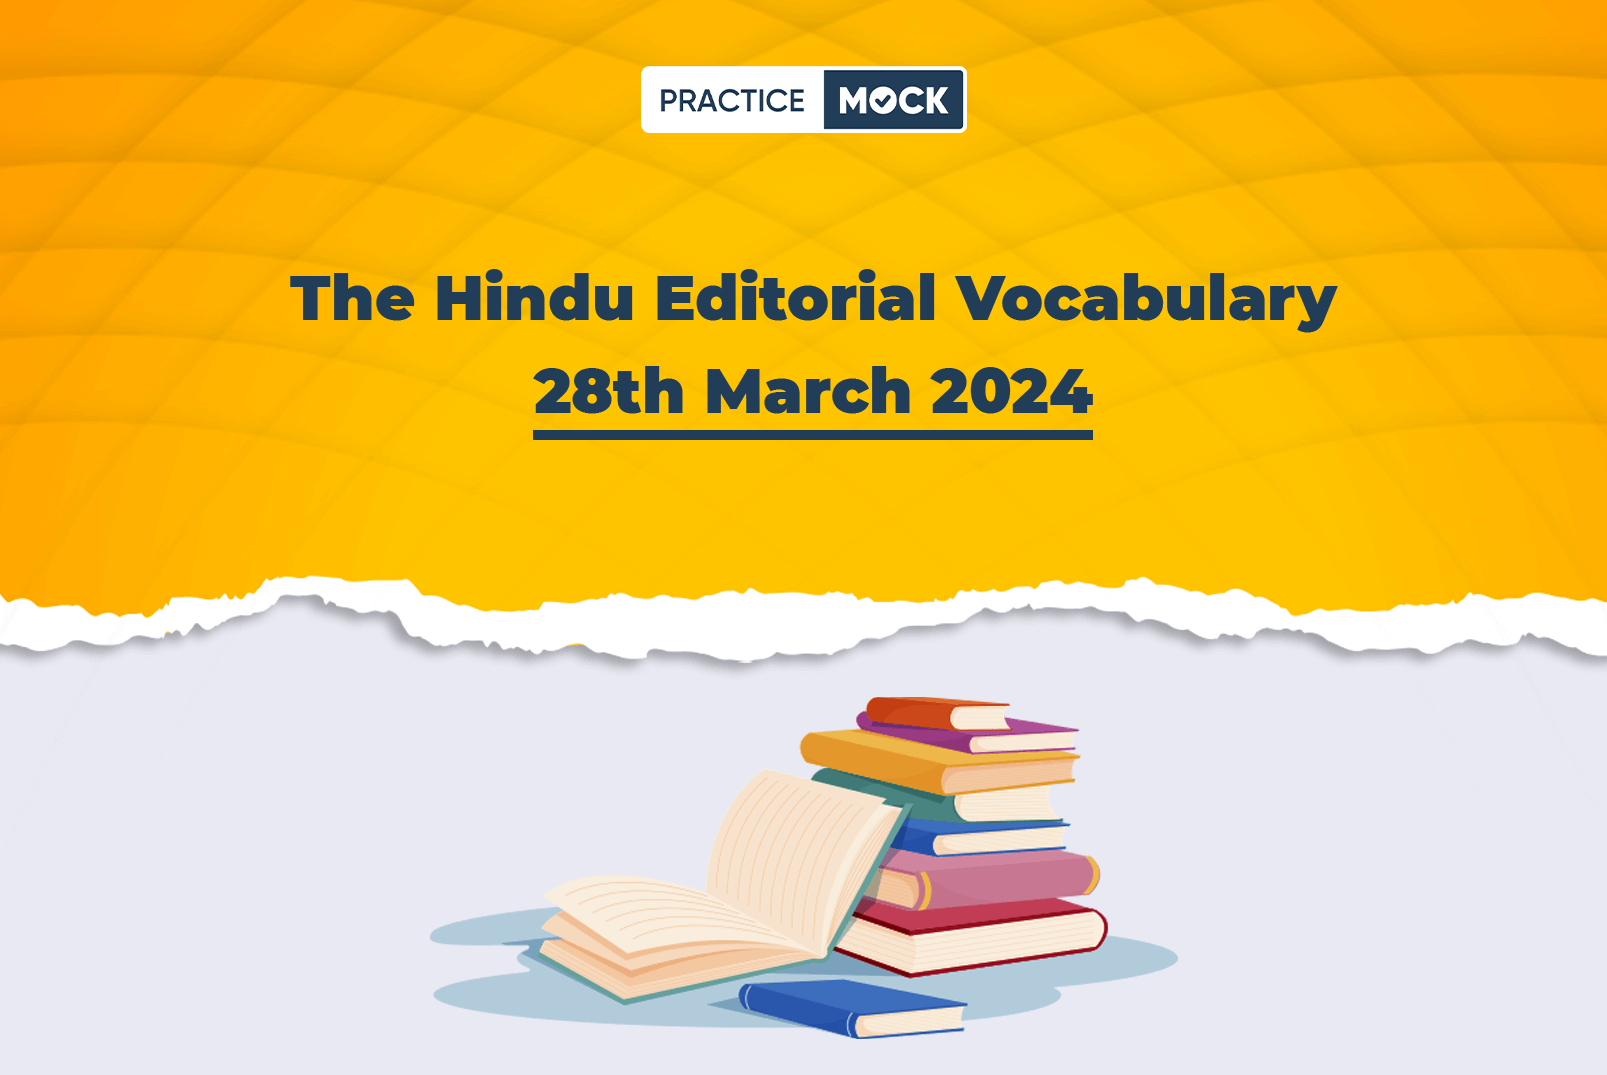 The Hindu Editorial Vocabulary 28th March 2024